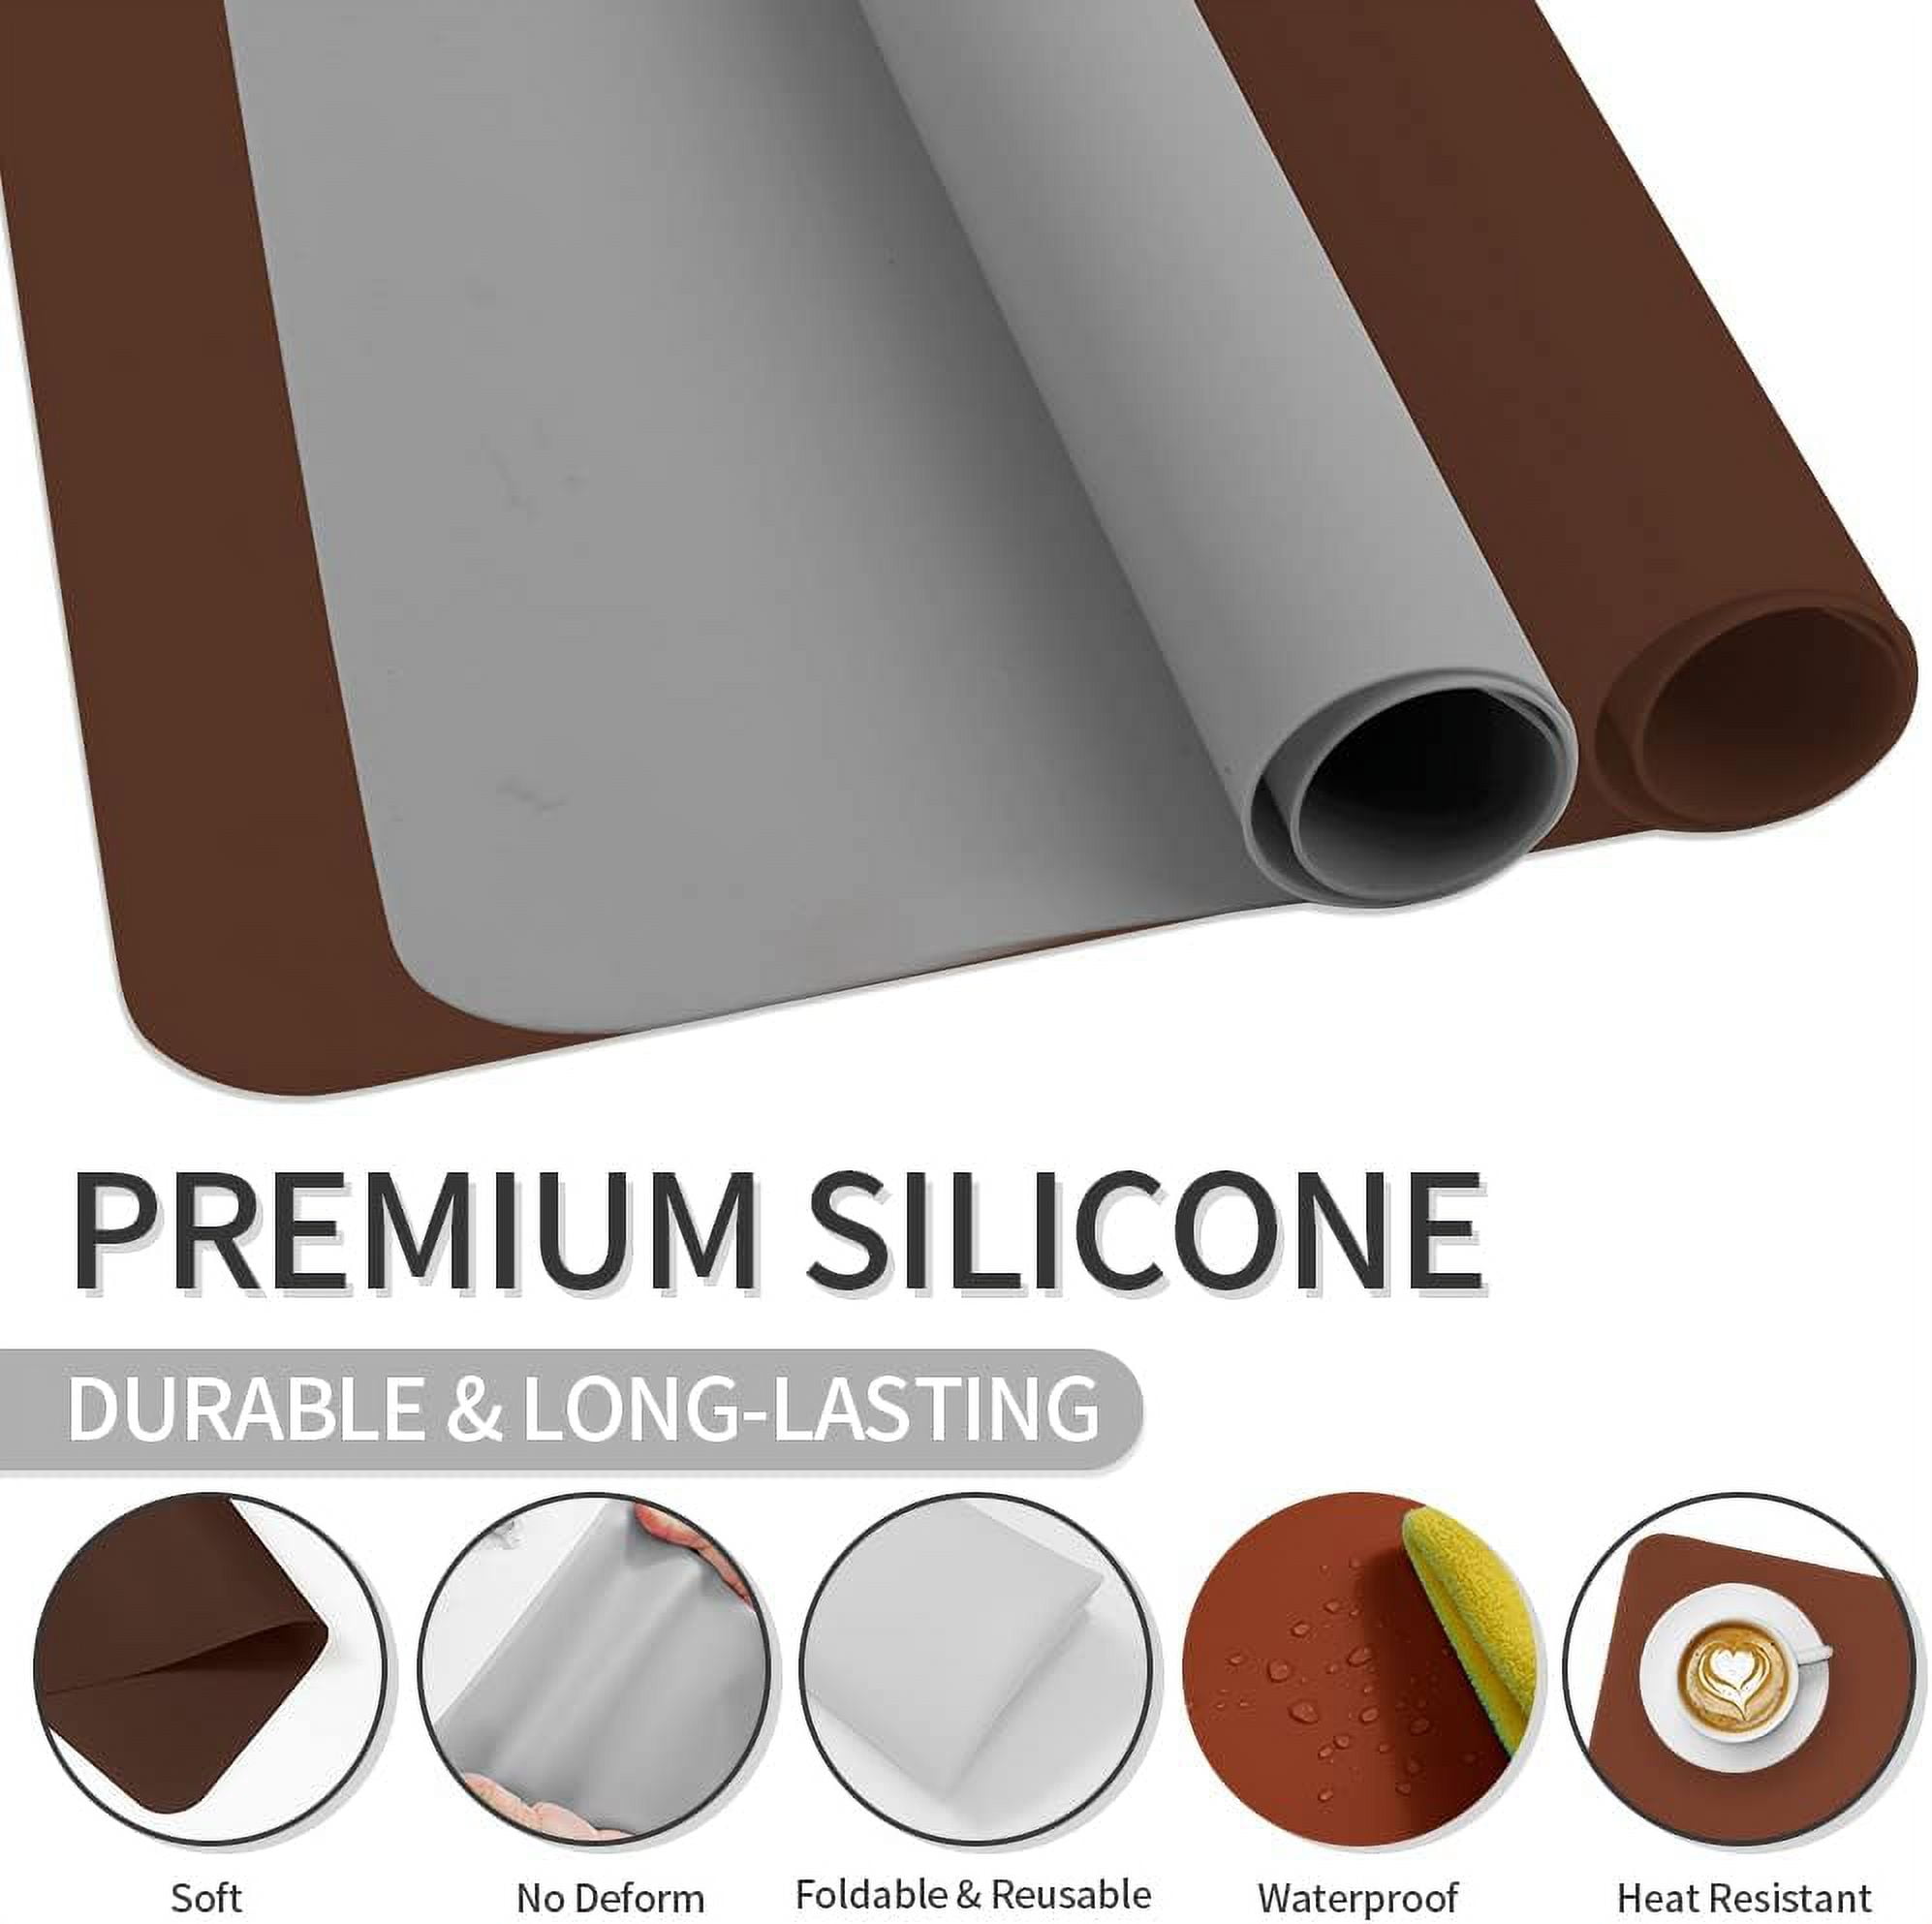 Large Silicone Craft Mat, 23.62 * 15.75 Inches Silicone Painting